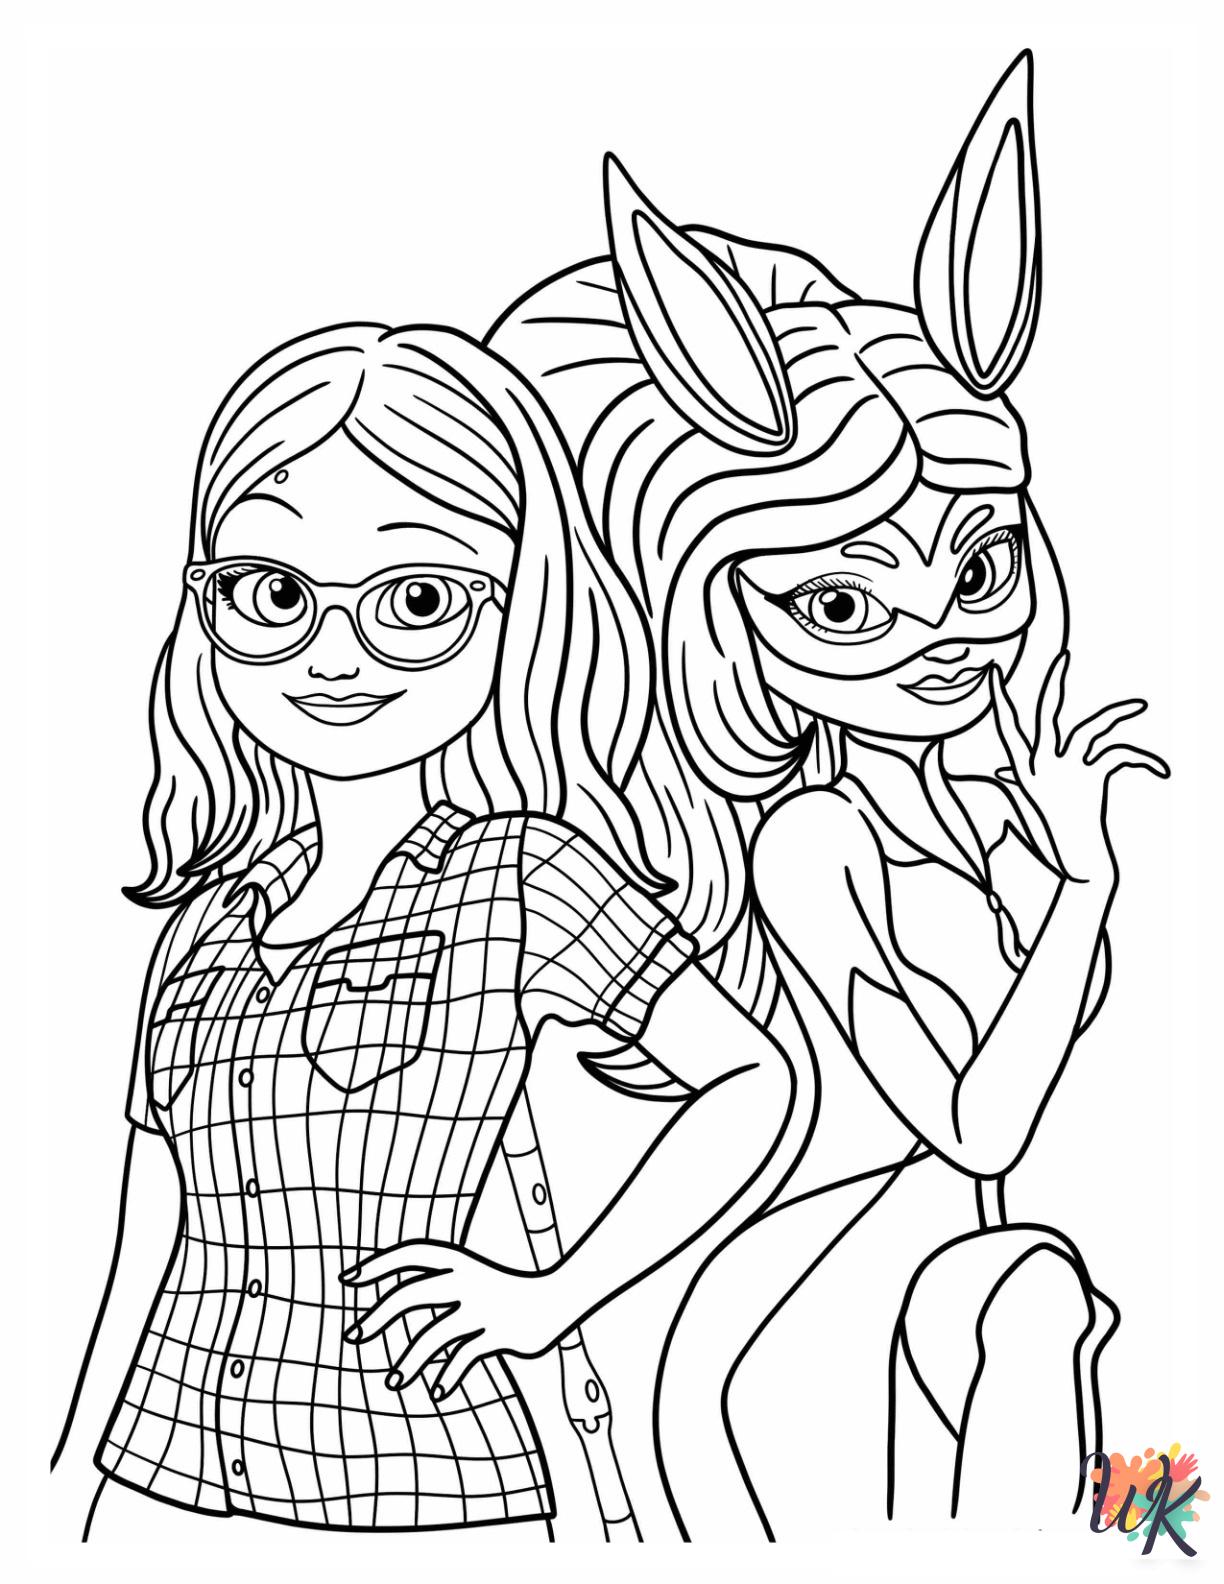 Miraculous Ladybug ornament coloring pages